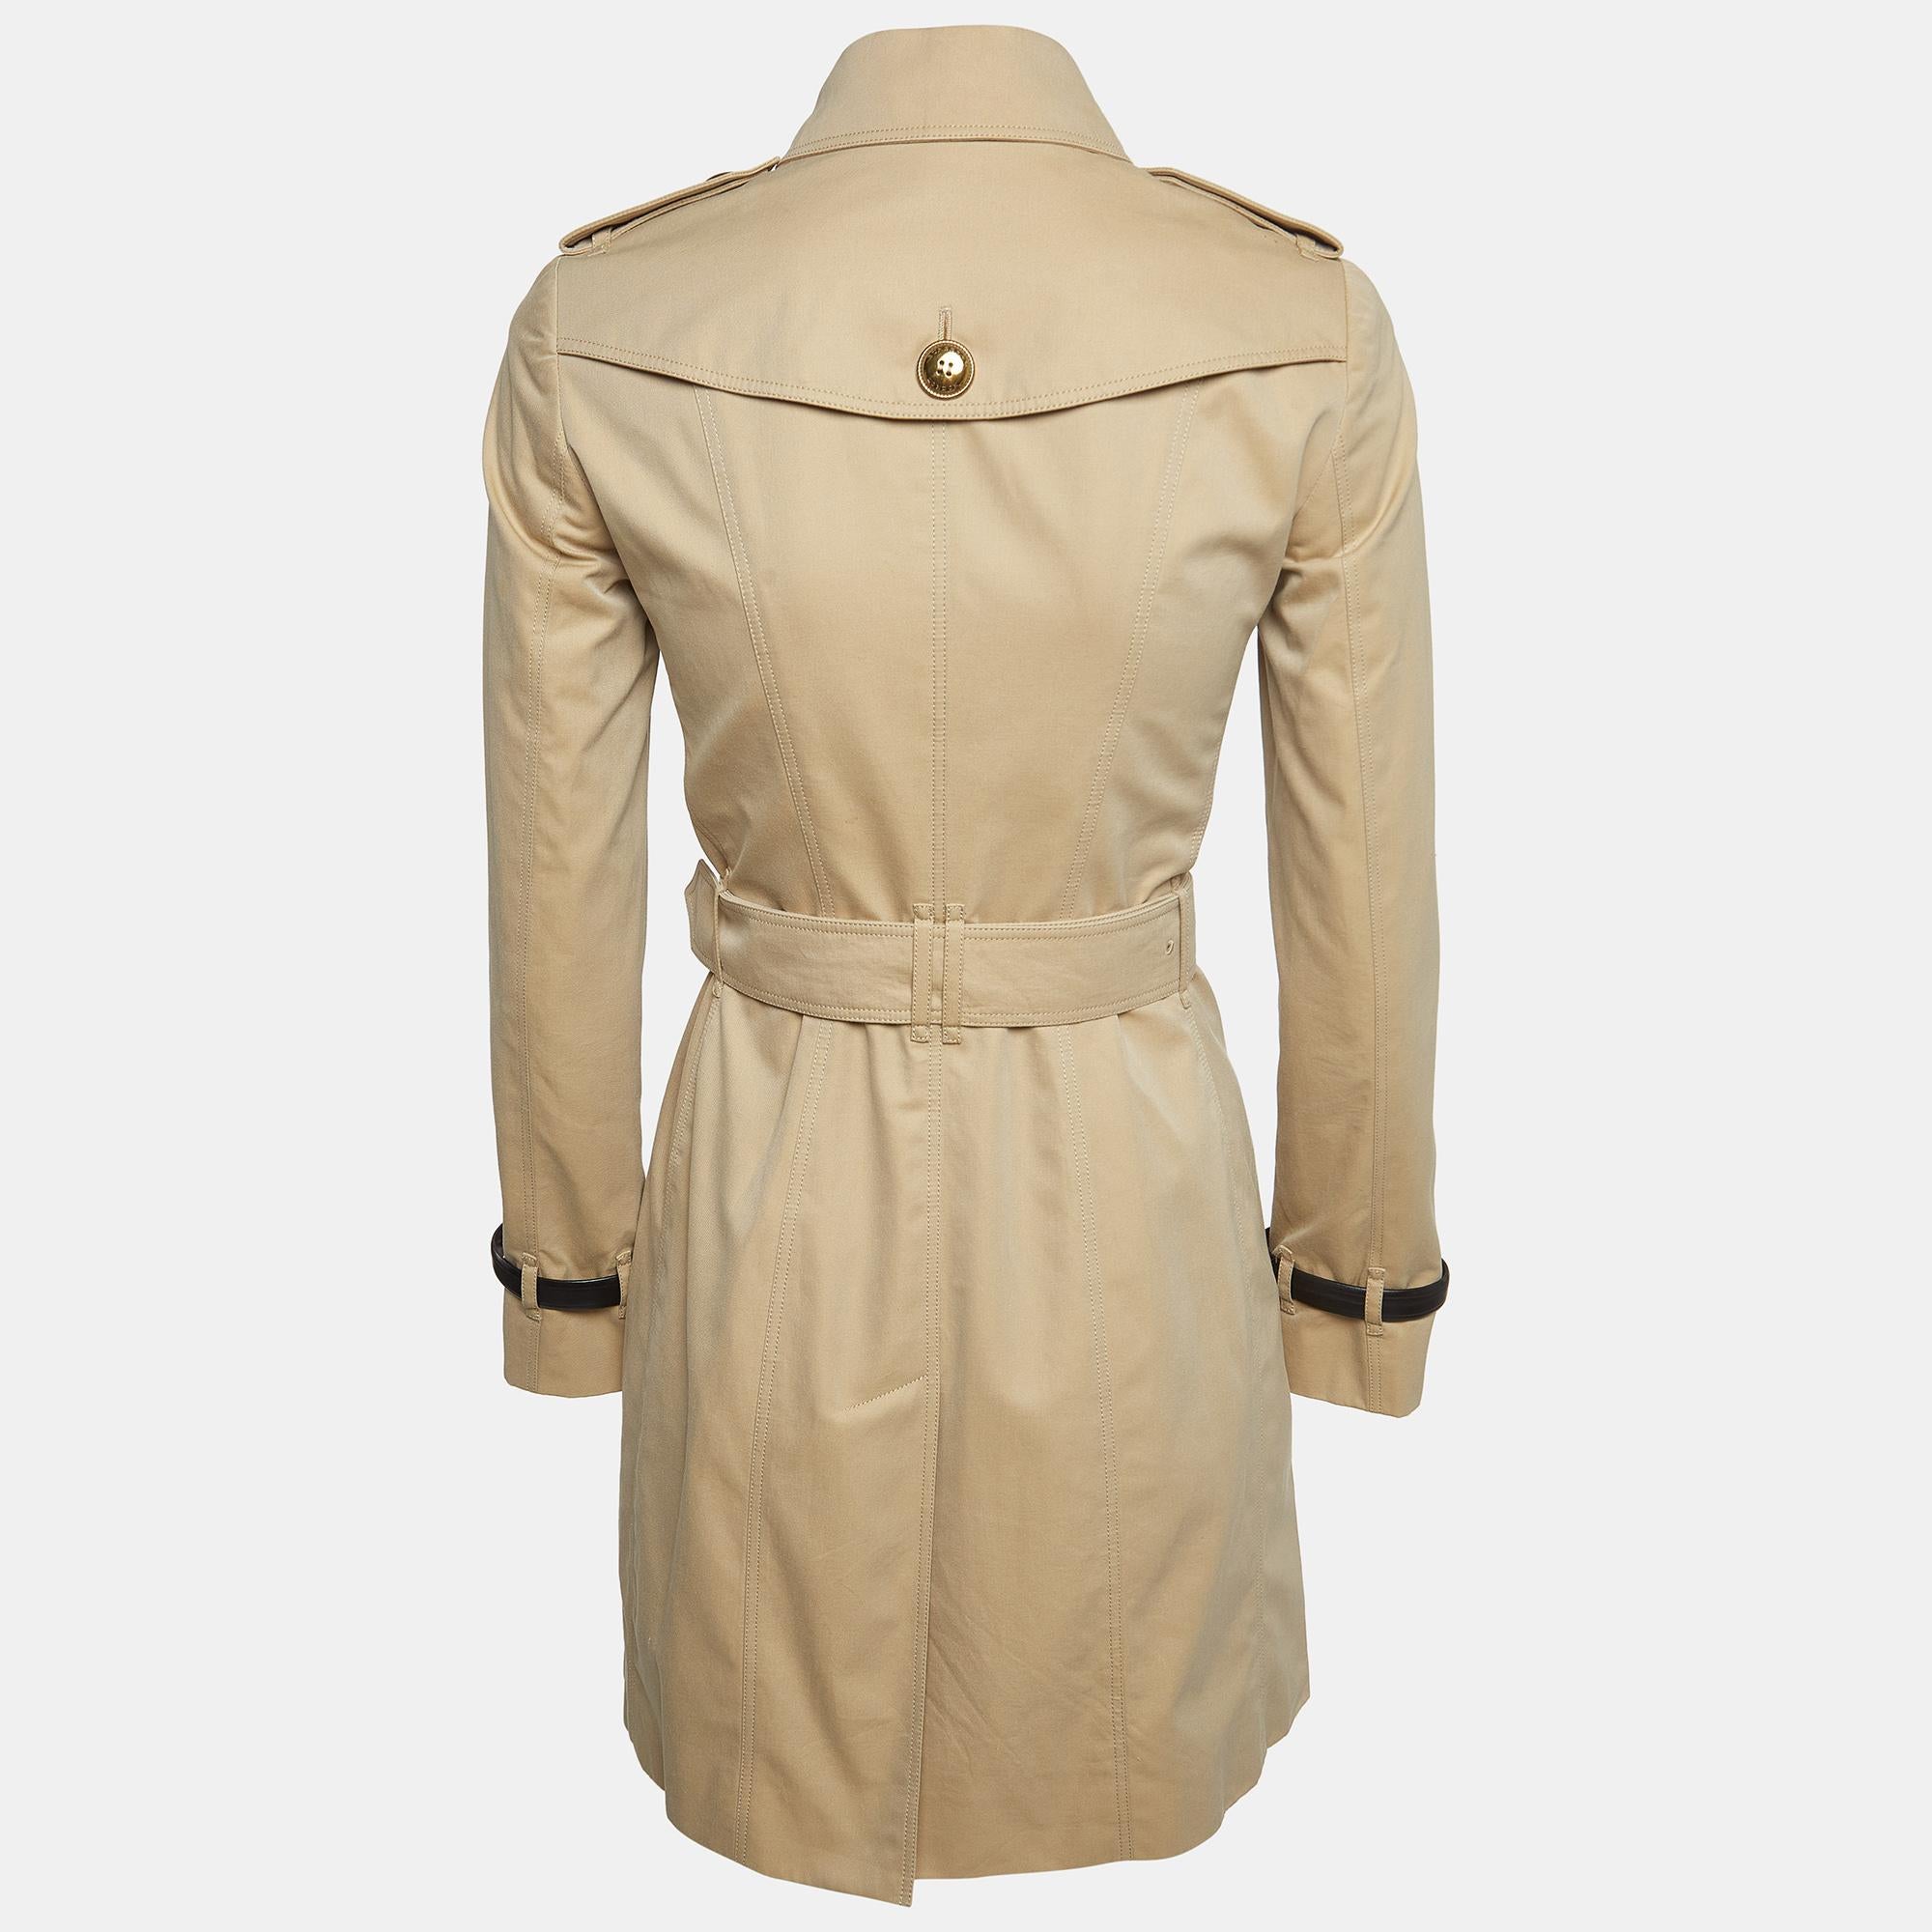 Crafted in Burberry's iconic beige gabardine, this trench coat exudes timeless elegance. Its belted silhouette cinches at the waist, flattering the figure, while classic details like epaulettes and a storm flap nod to traditional design. Practical